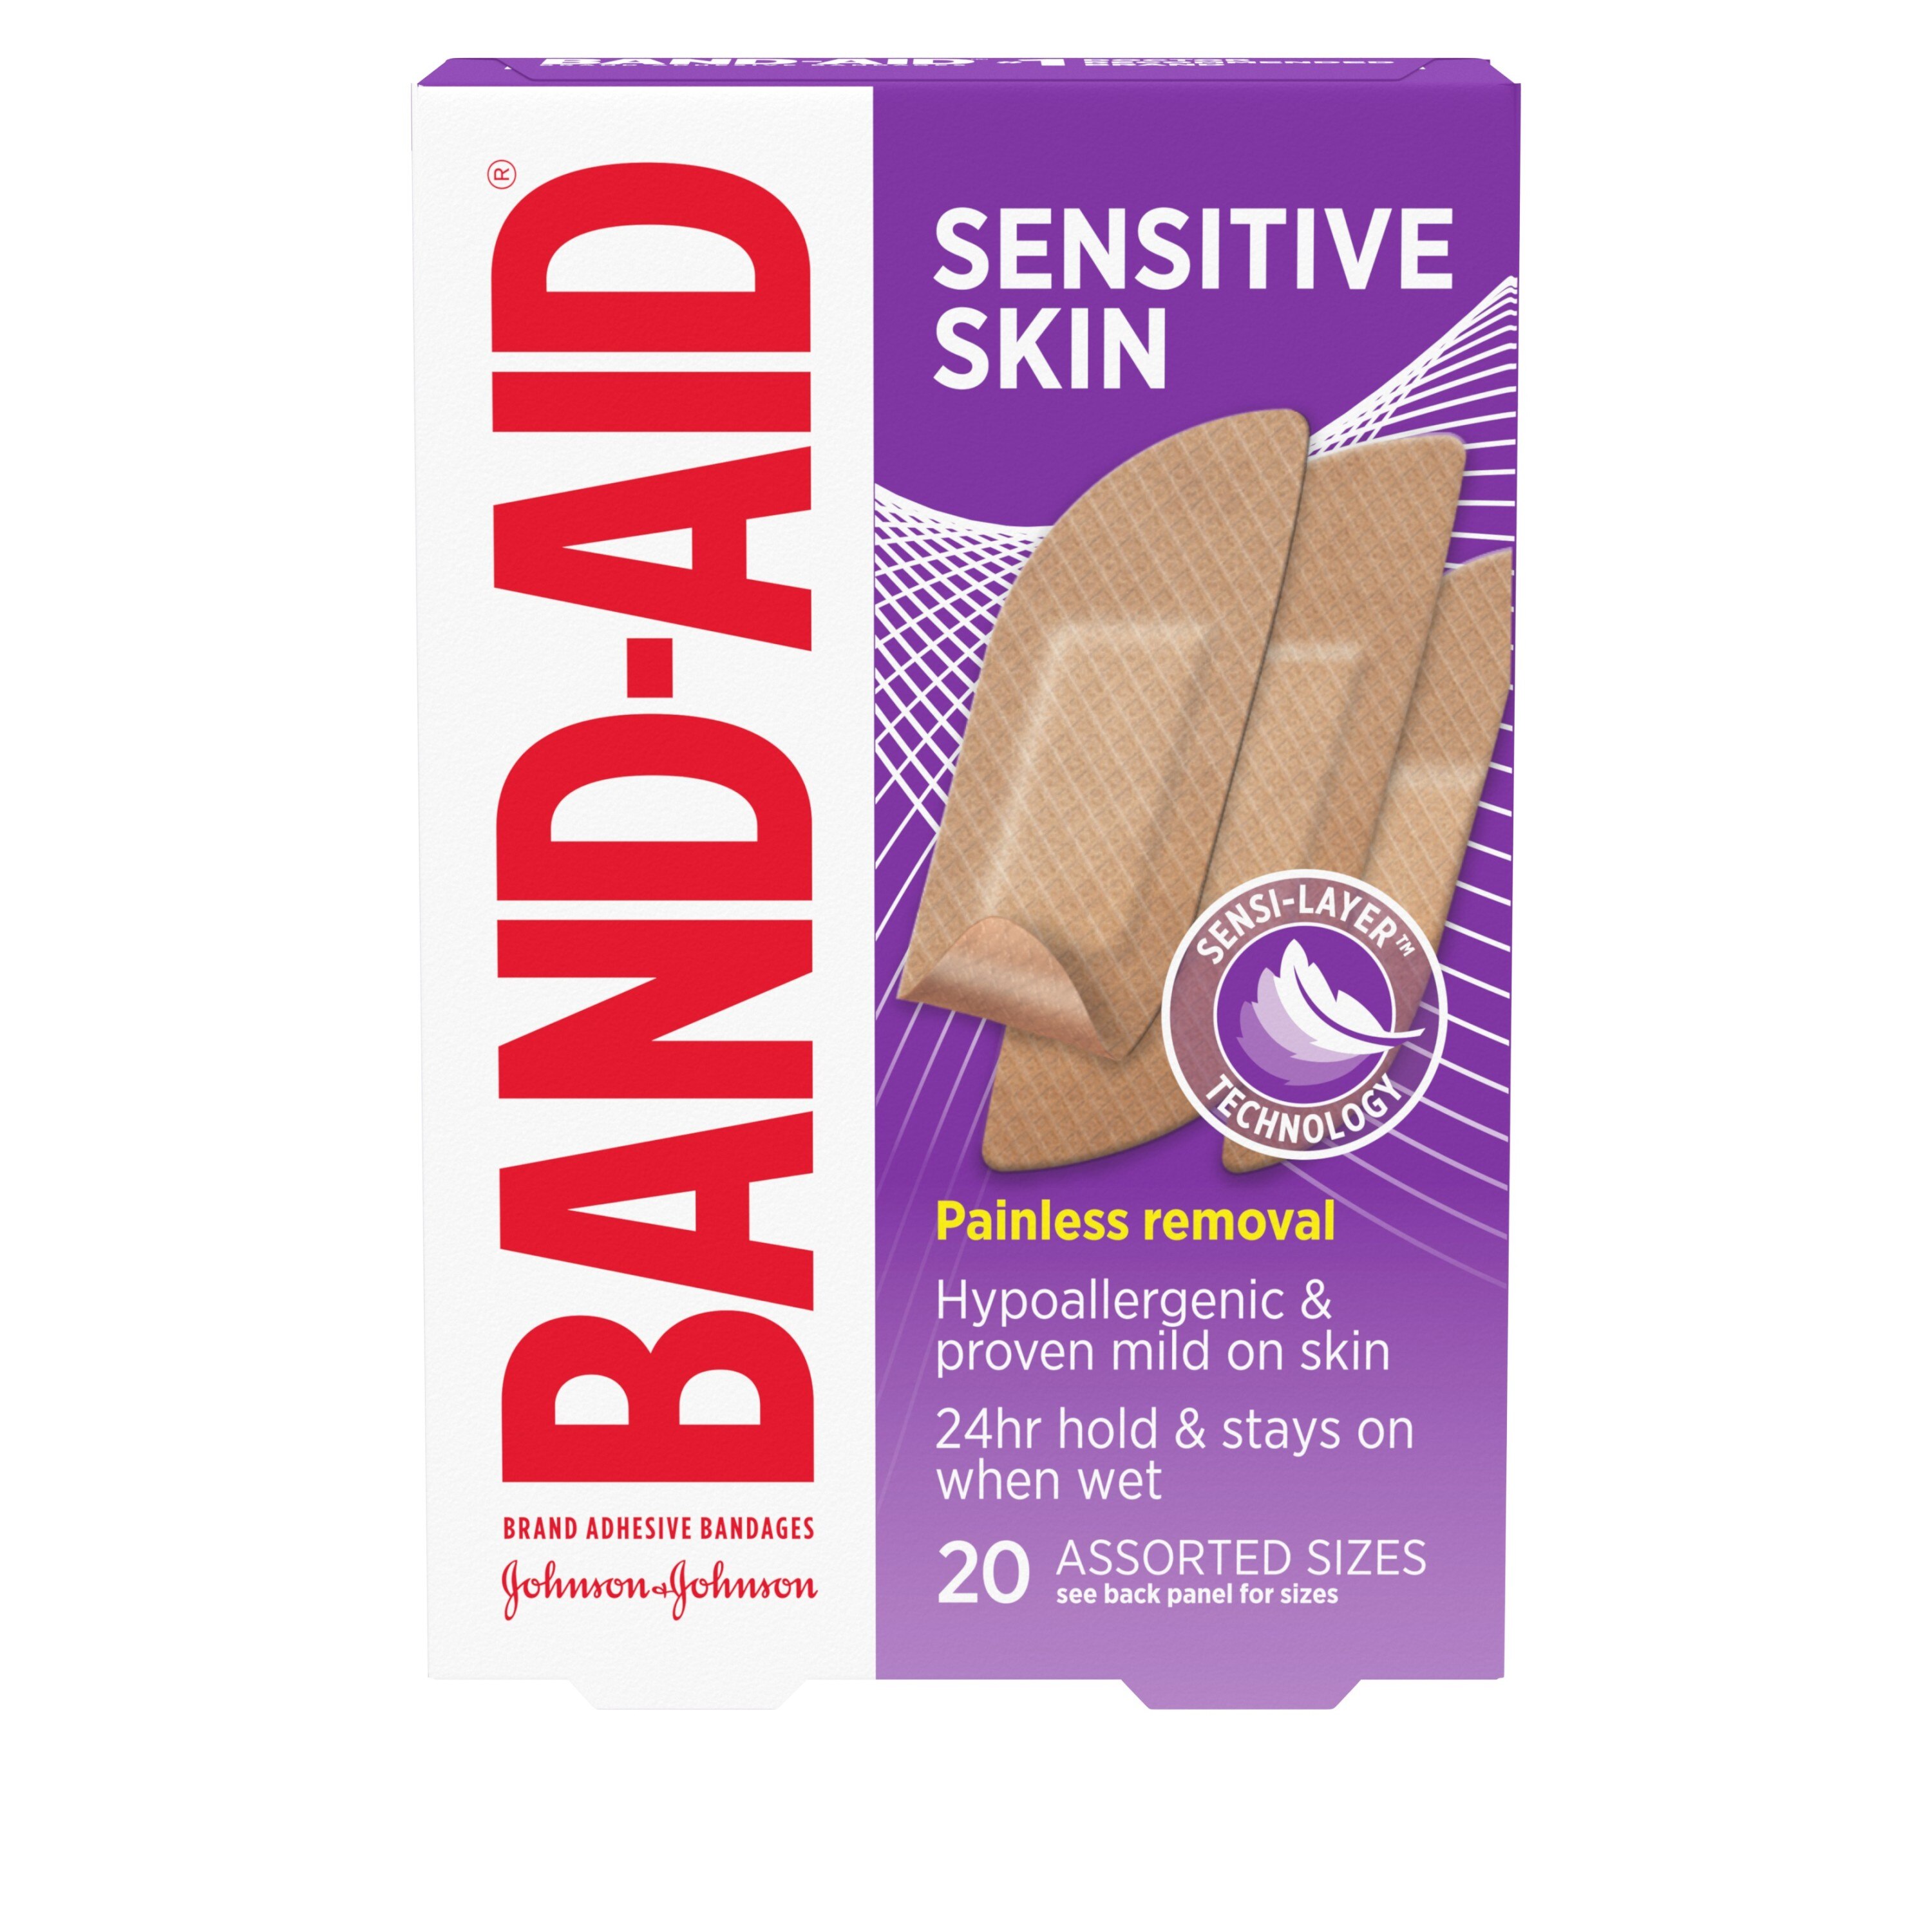 Band-Aid Brand Adhesive Bandages for Sensitive Skin, Assorted Sizes, 20 CT